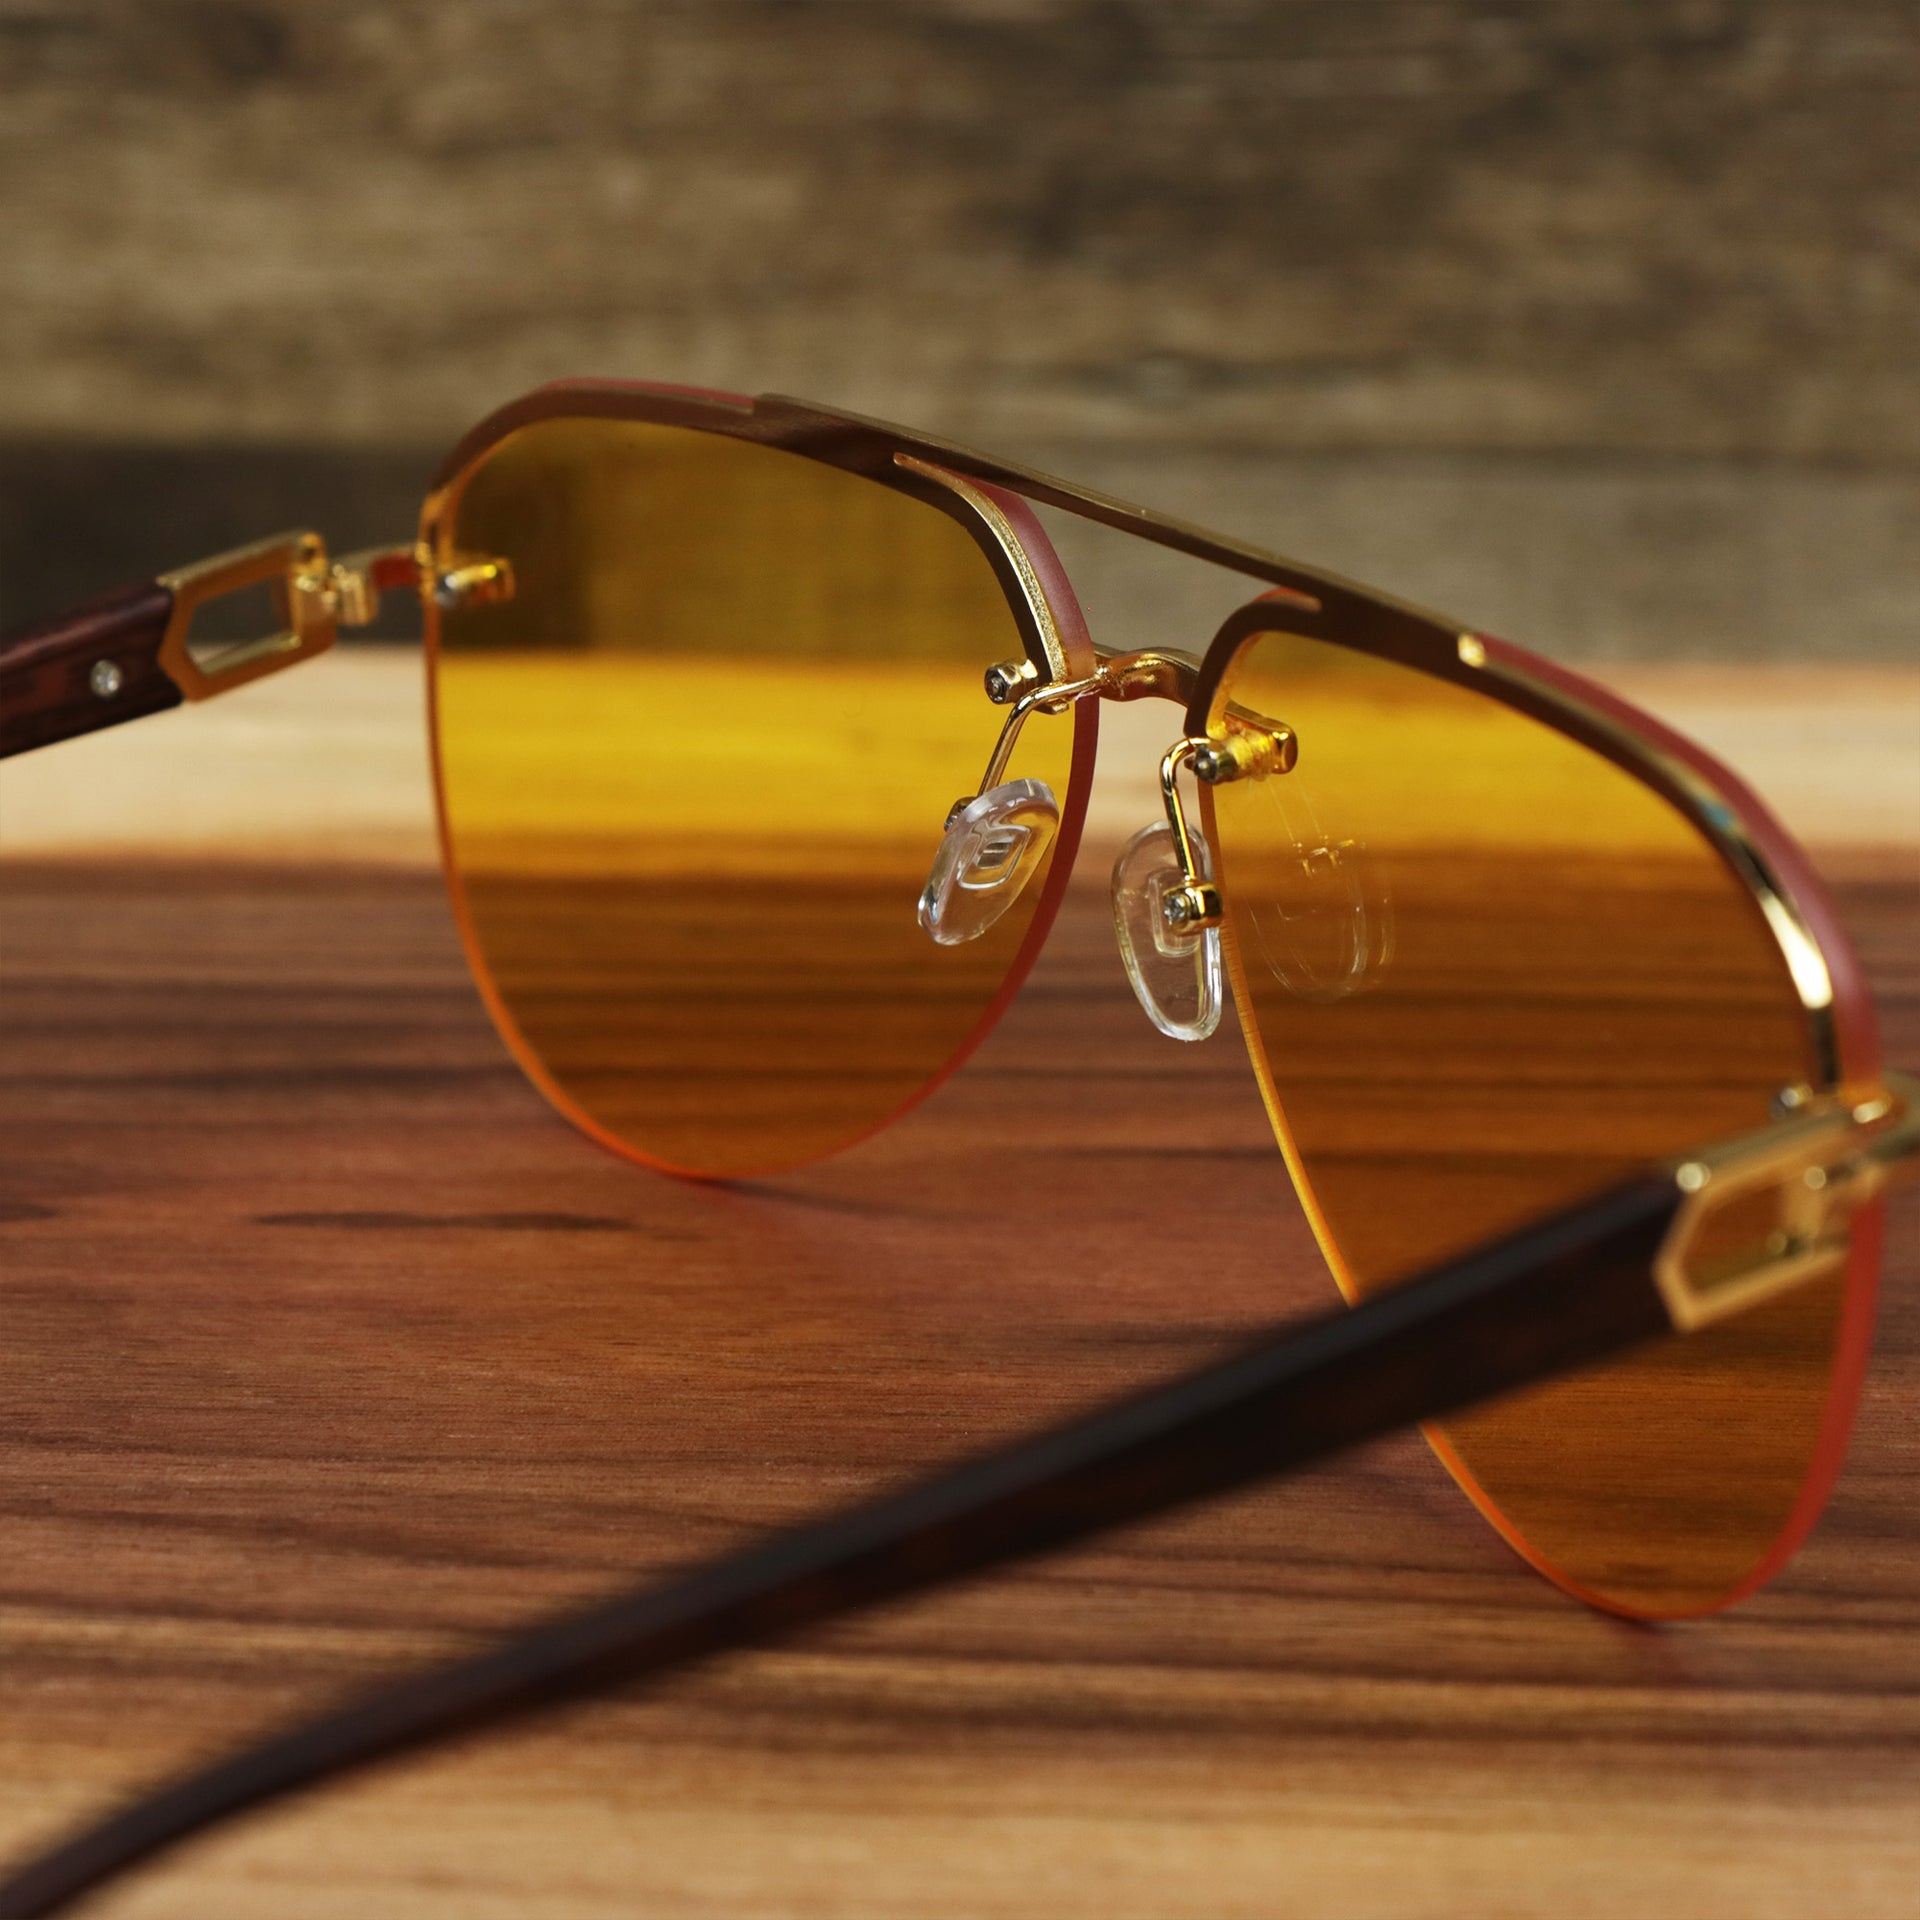 The inside of the Round Aviator Frames Yellow Lens Sunglasses with Gold Frame